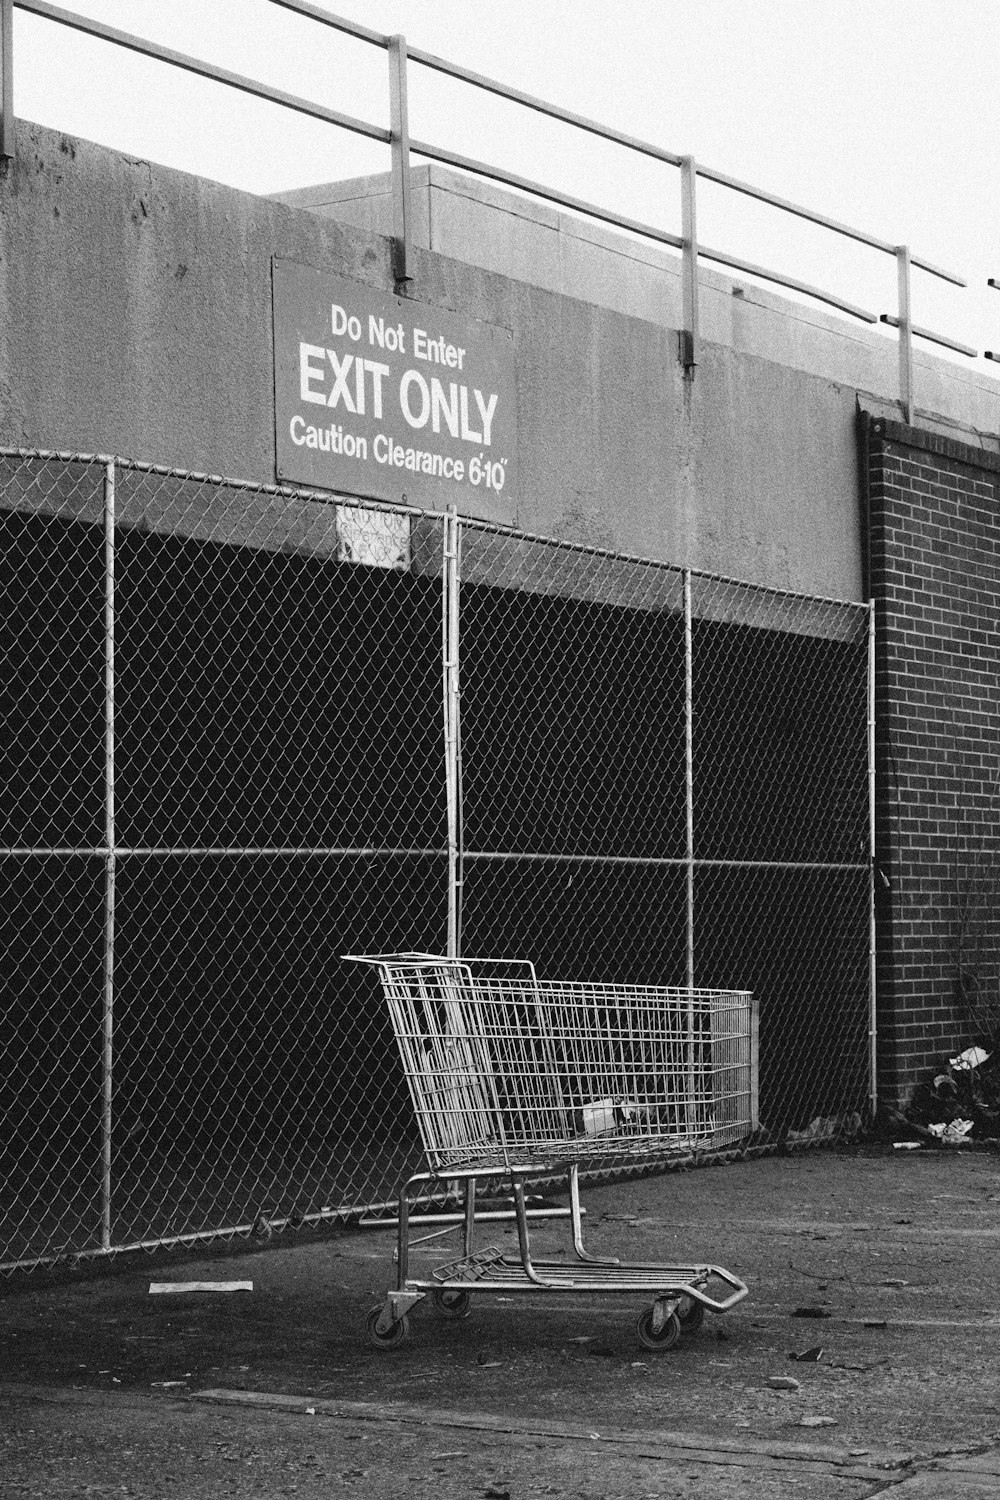 grayscale photo of shopping cart near building